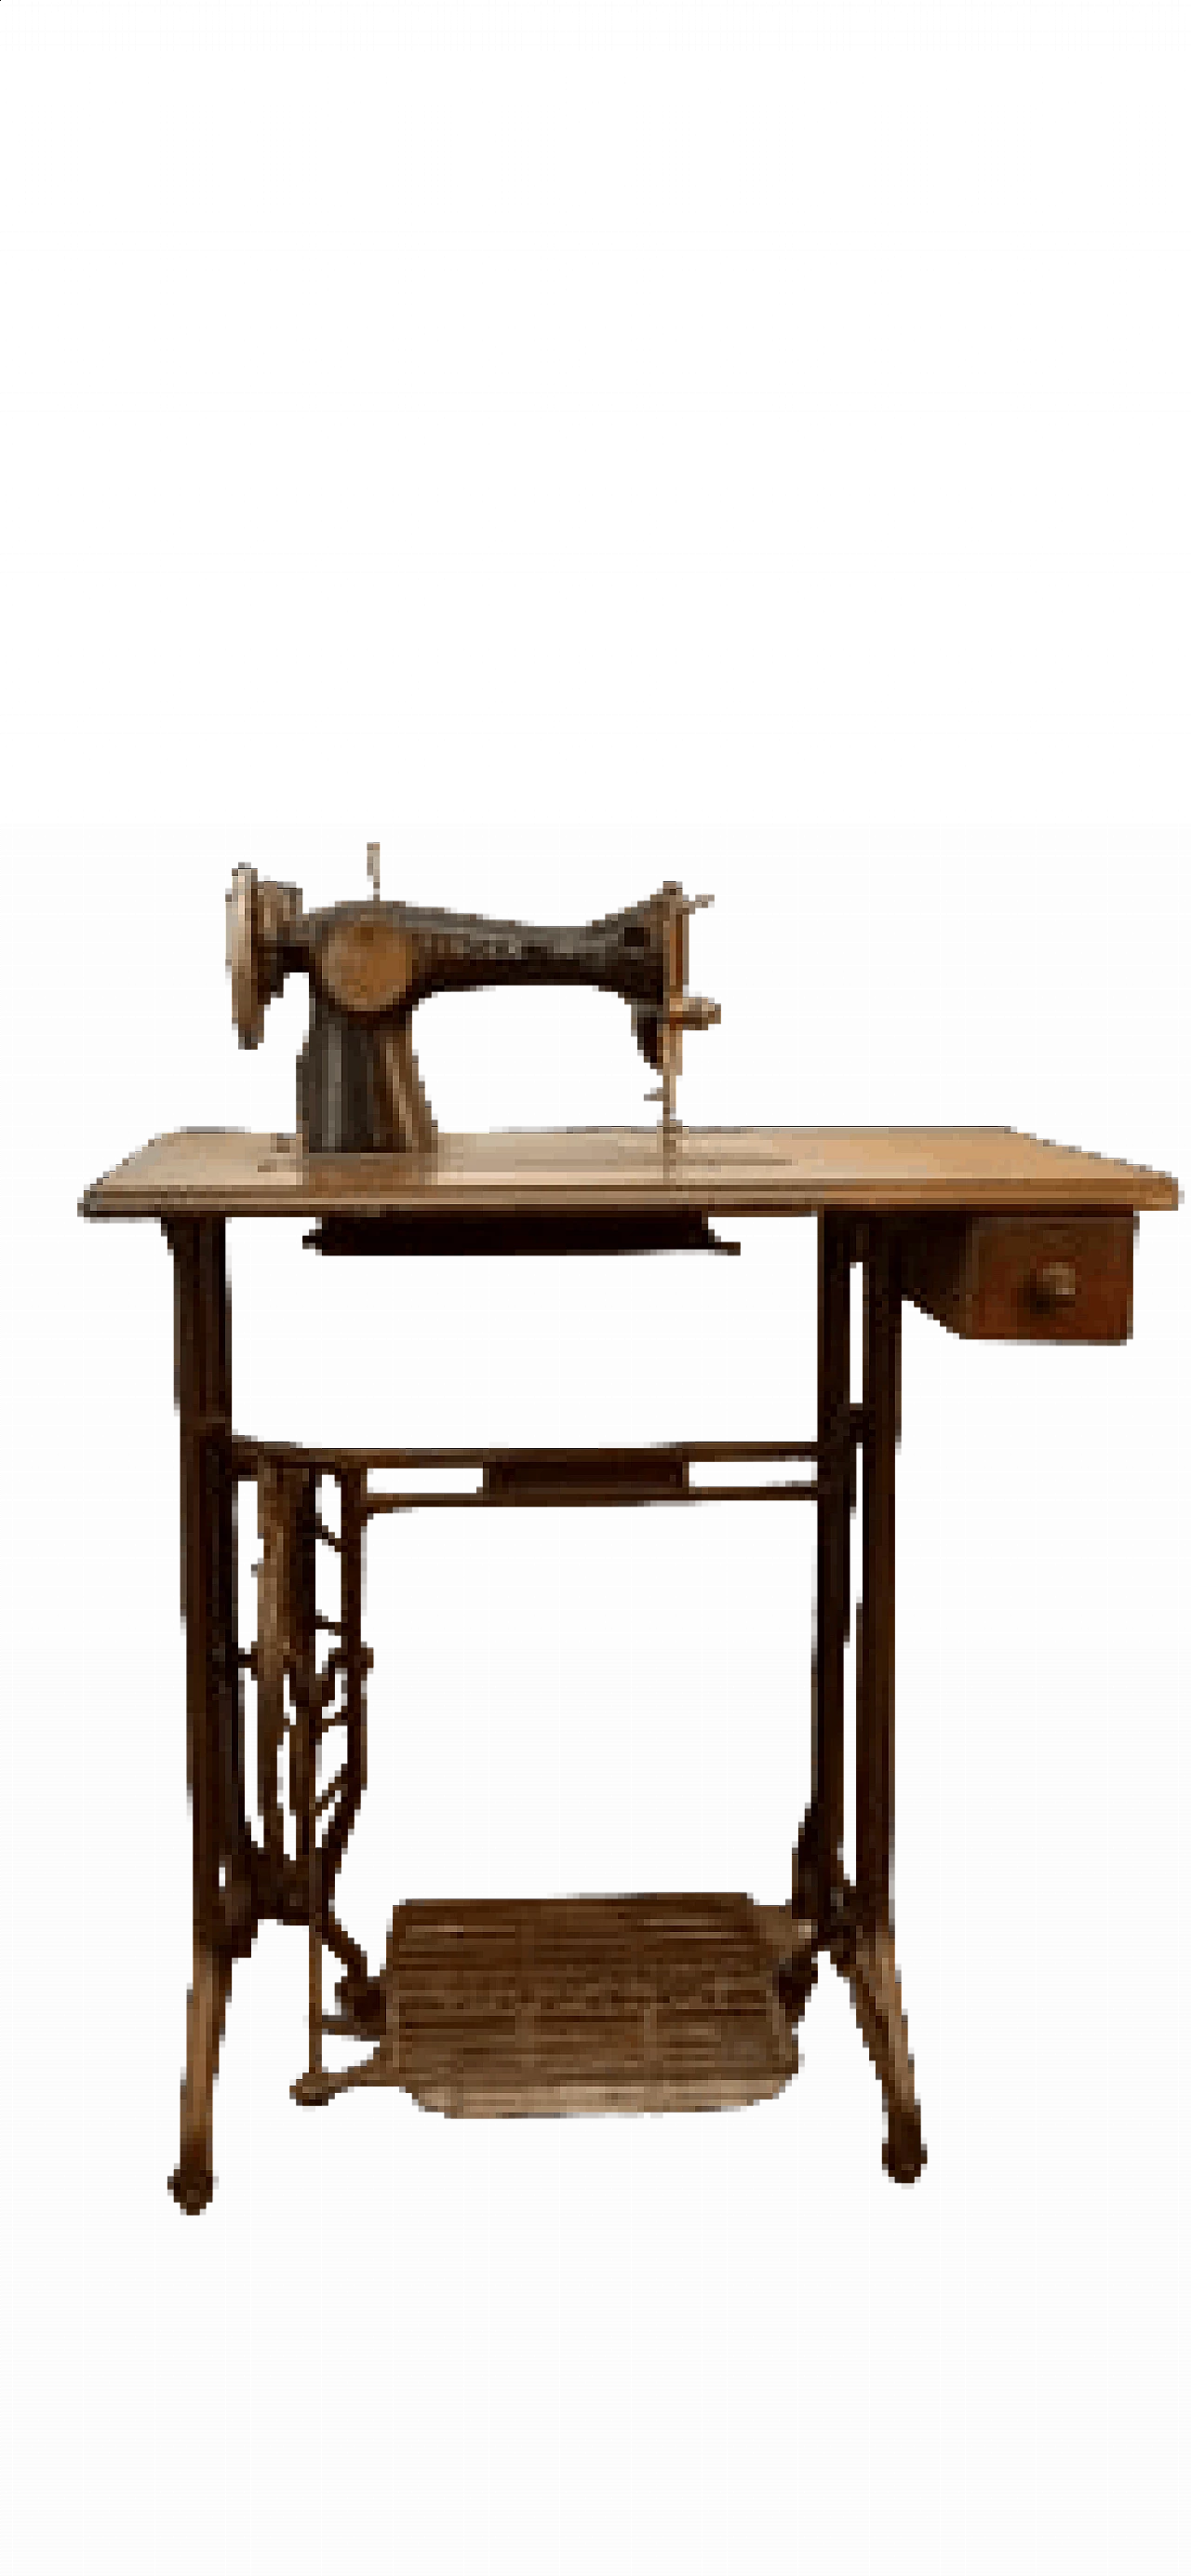 Cast iron and walnut Singer sewing machine, late 19th century 20